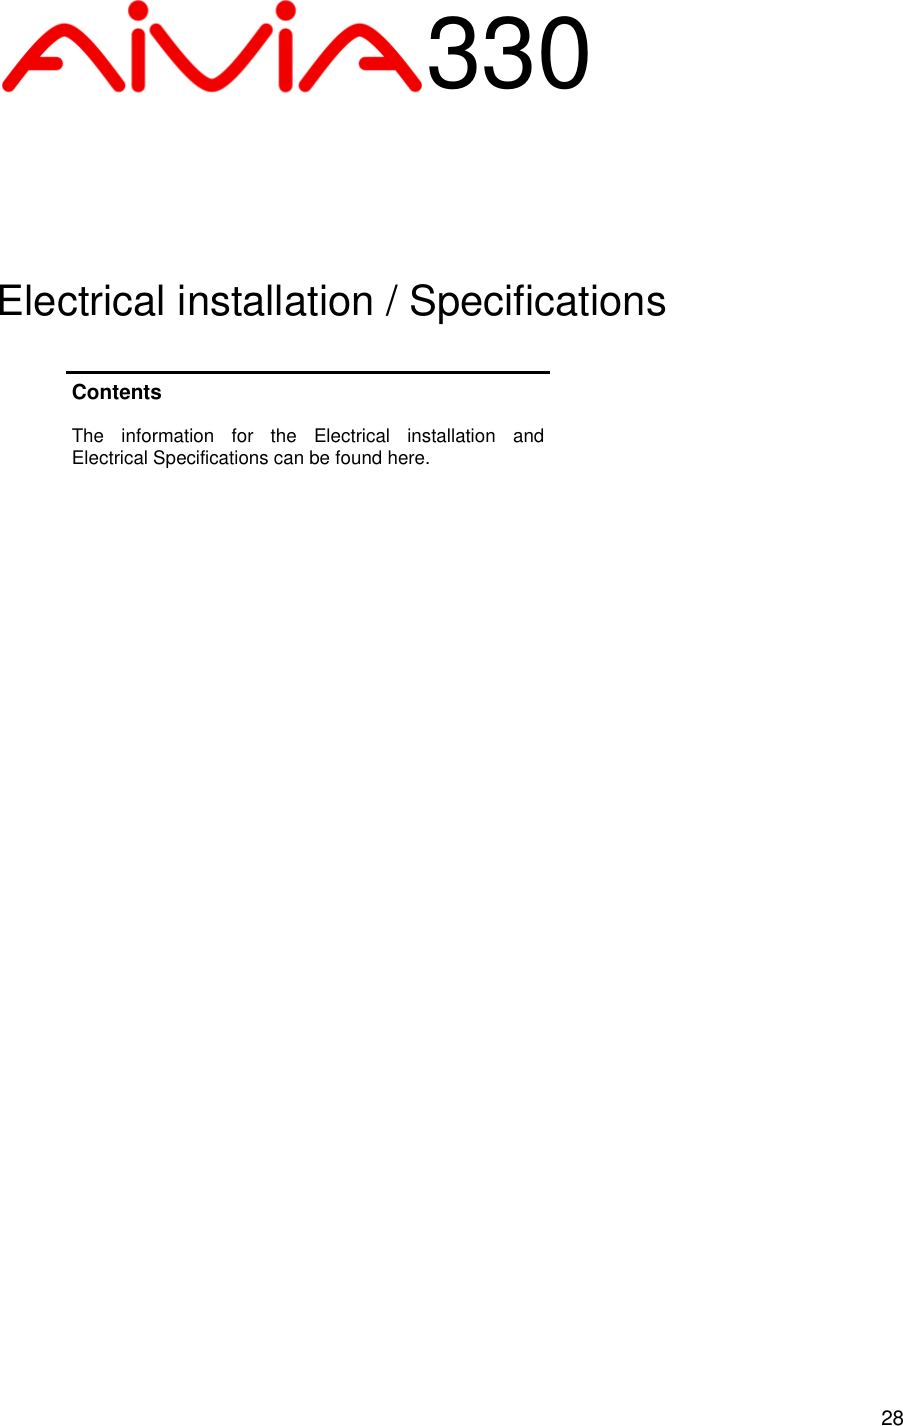  28 Contents  The  information  for  the  Electrical  installation  and Electrical Specifications can be found here. 330 Electrical installation / Specifications 